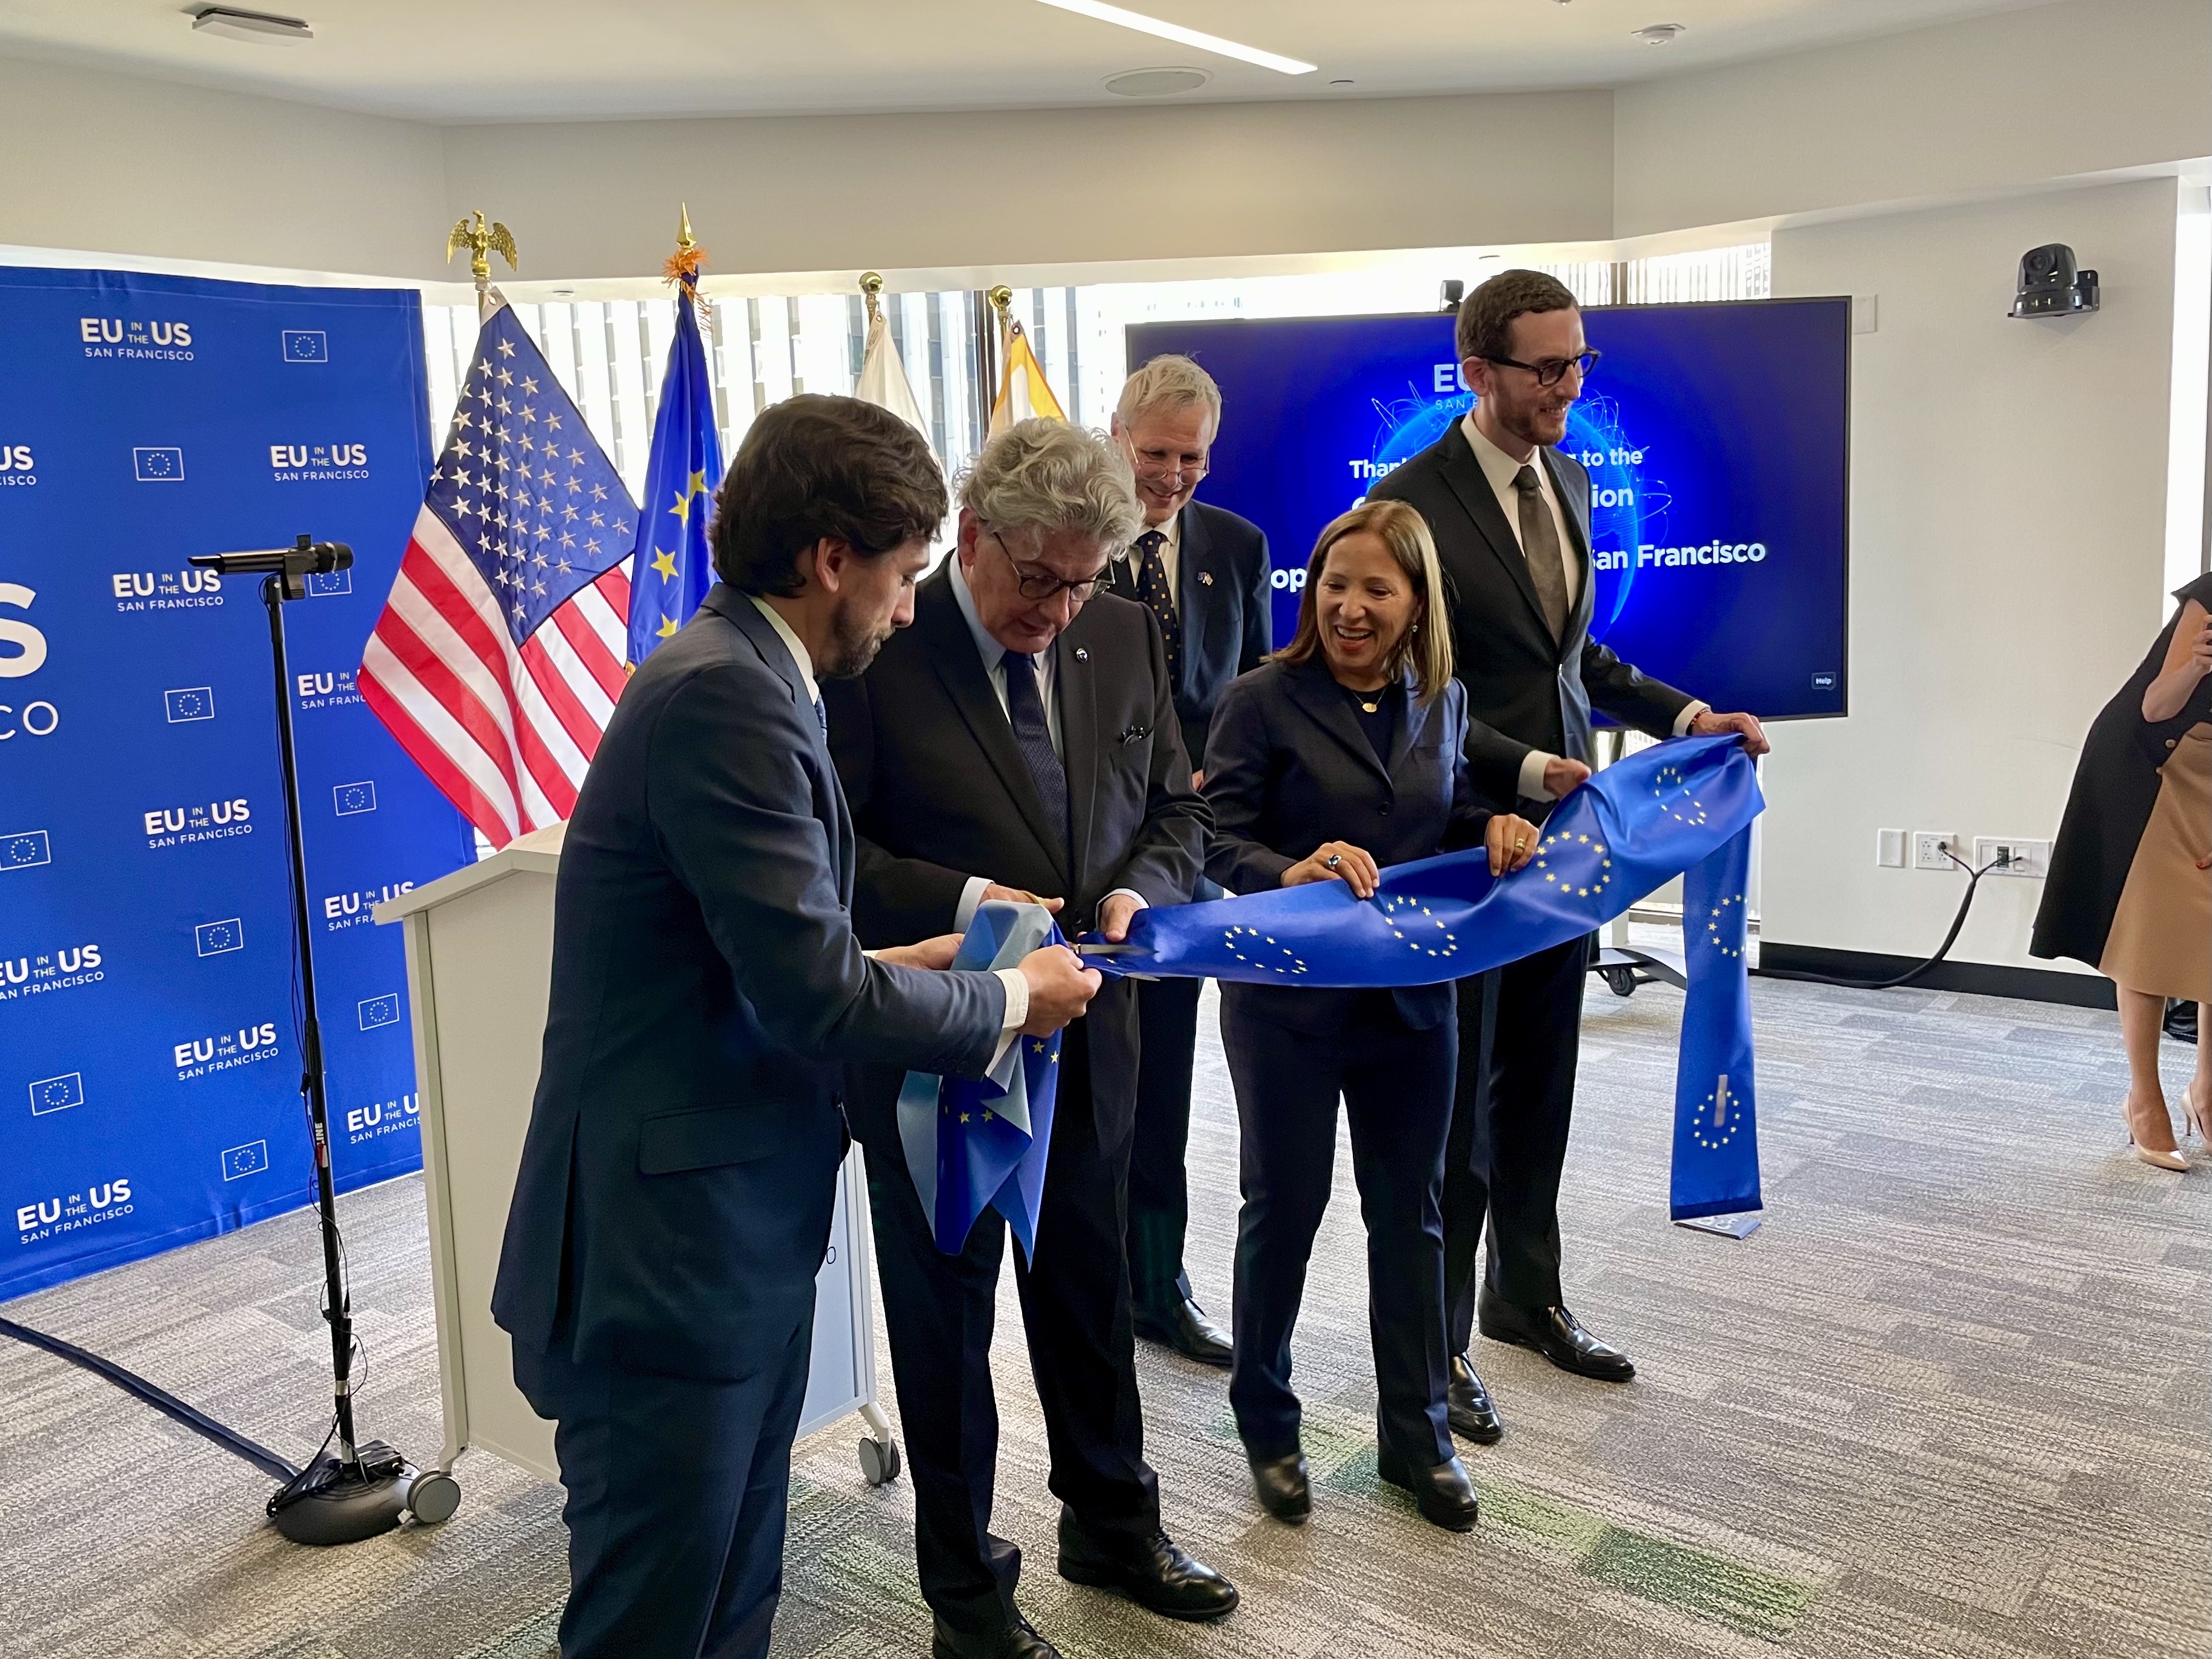 Image of Lt. Governor at European Union’s newest diplomatic outpost in San Francisco